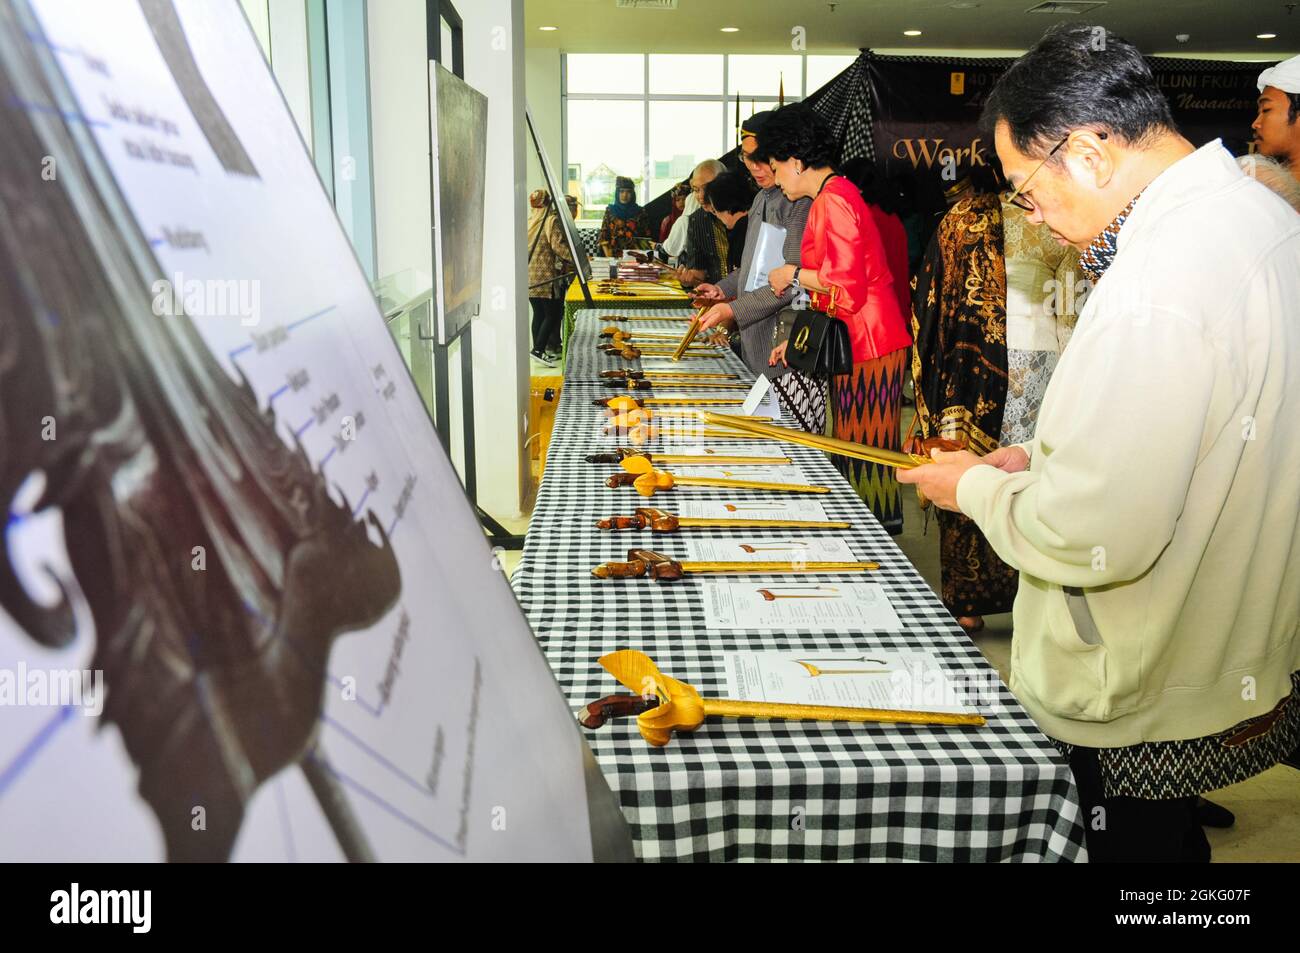 People are observing kris or keris, a type of traditional dagger, displayed on a long table. Stock Photo